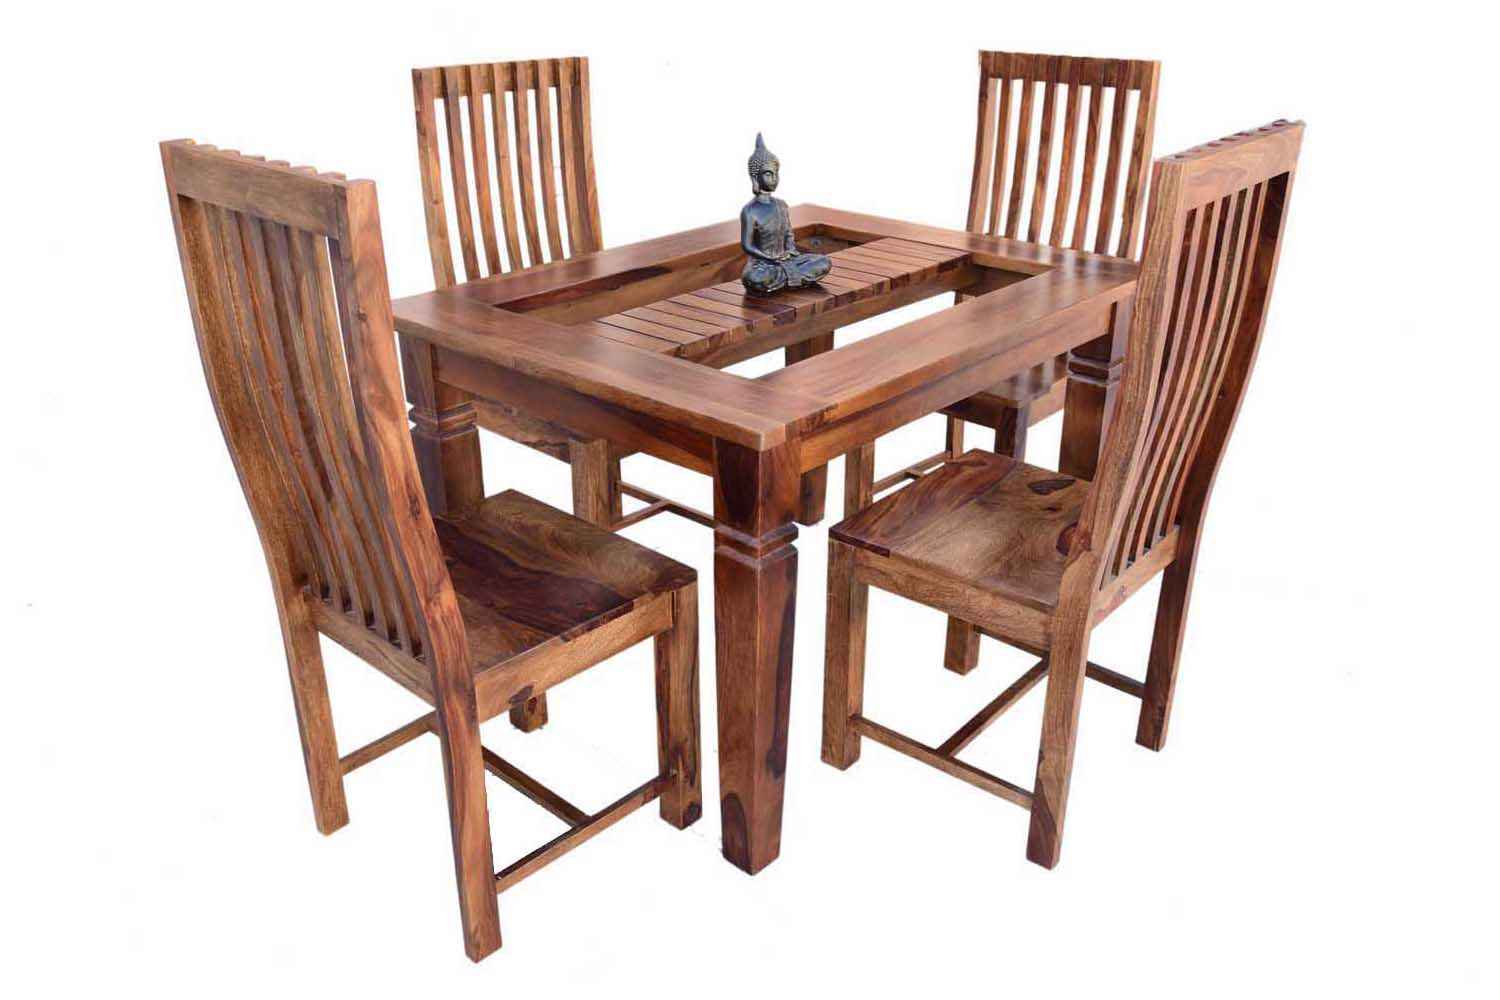 Buy 4-Seater swingo dining table with zernal wooden chair ...